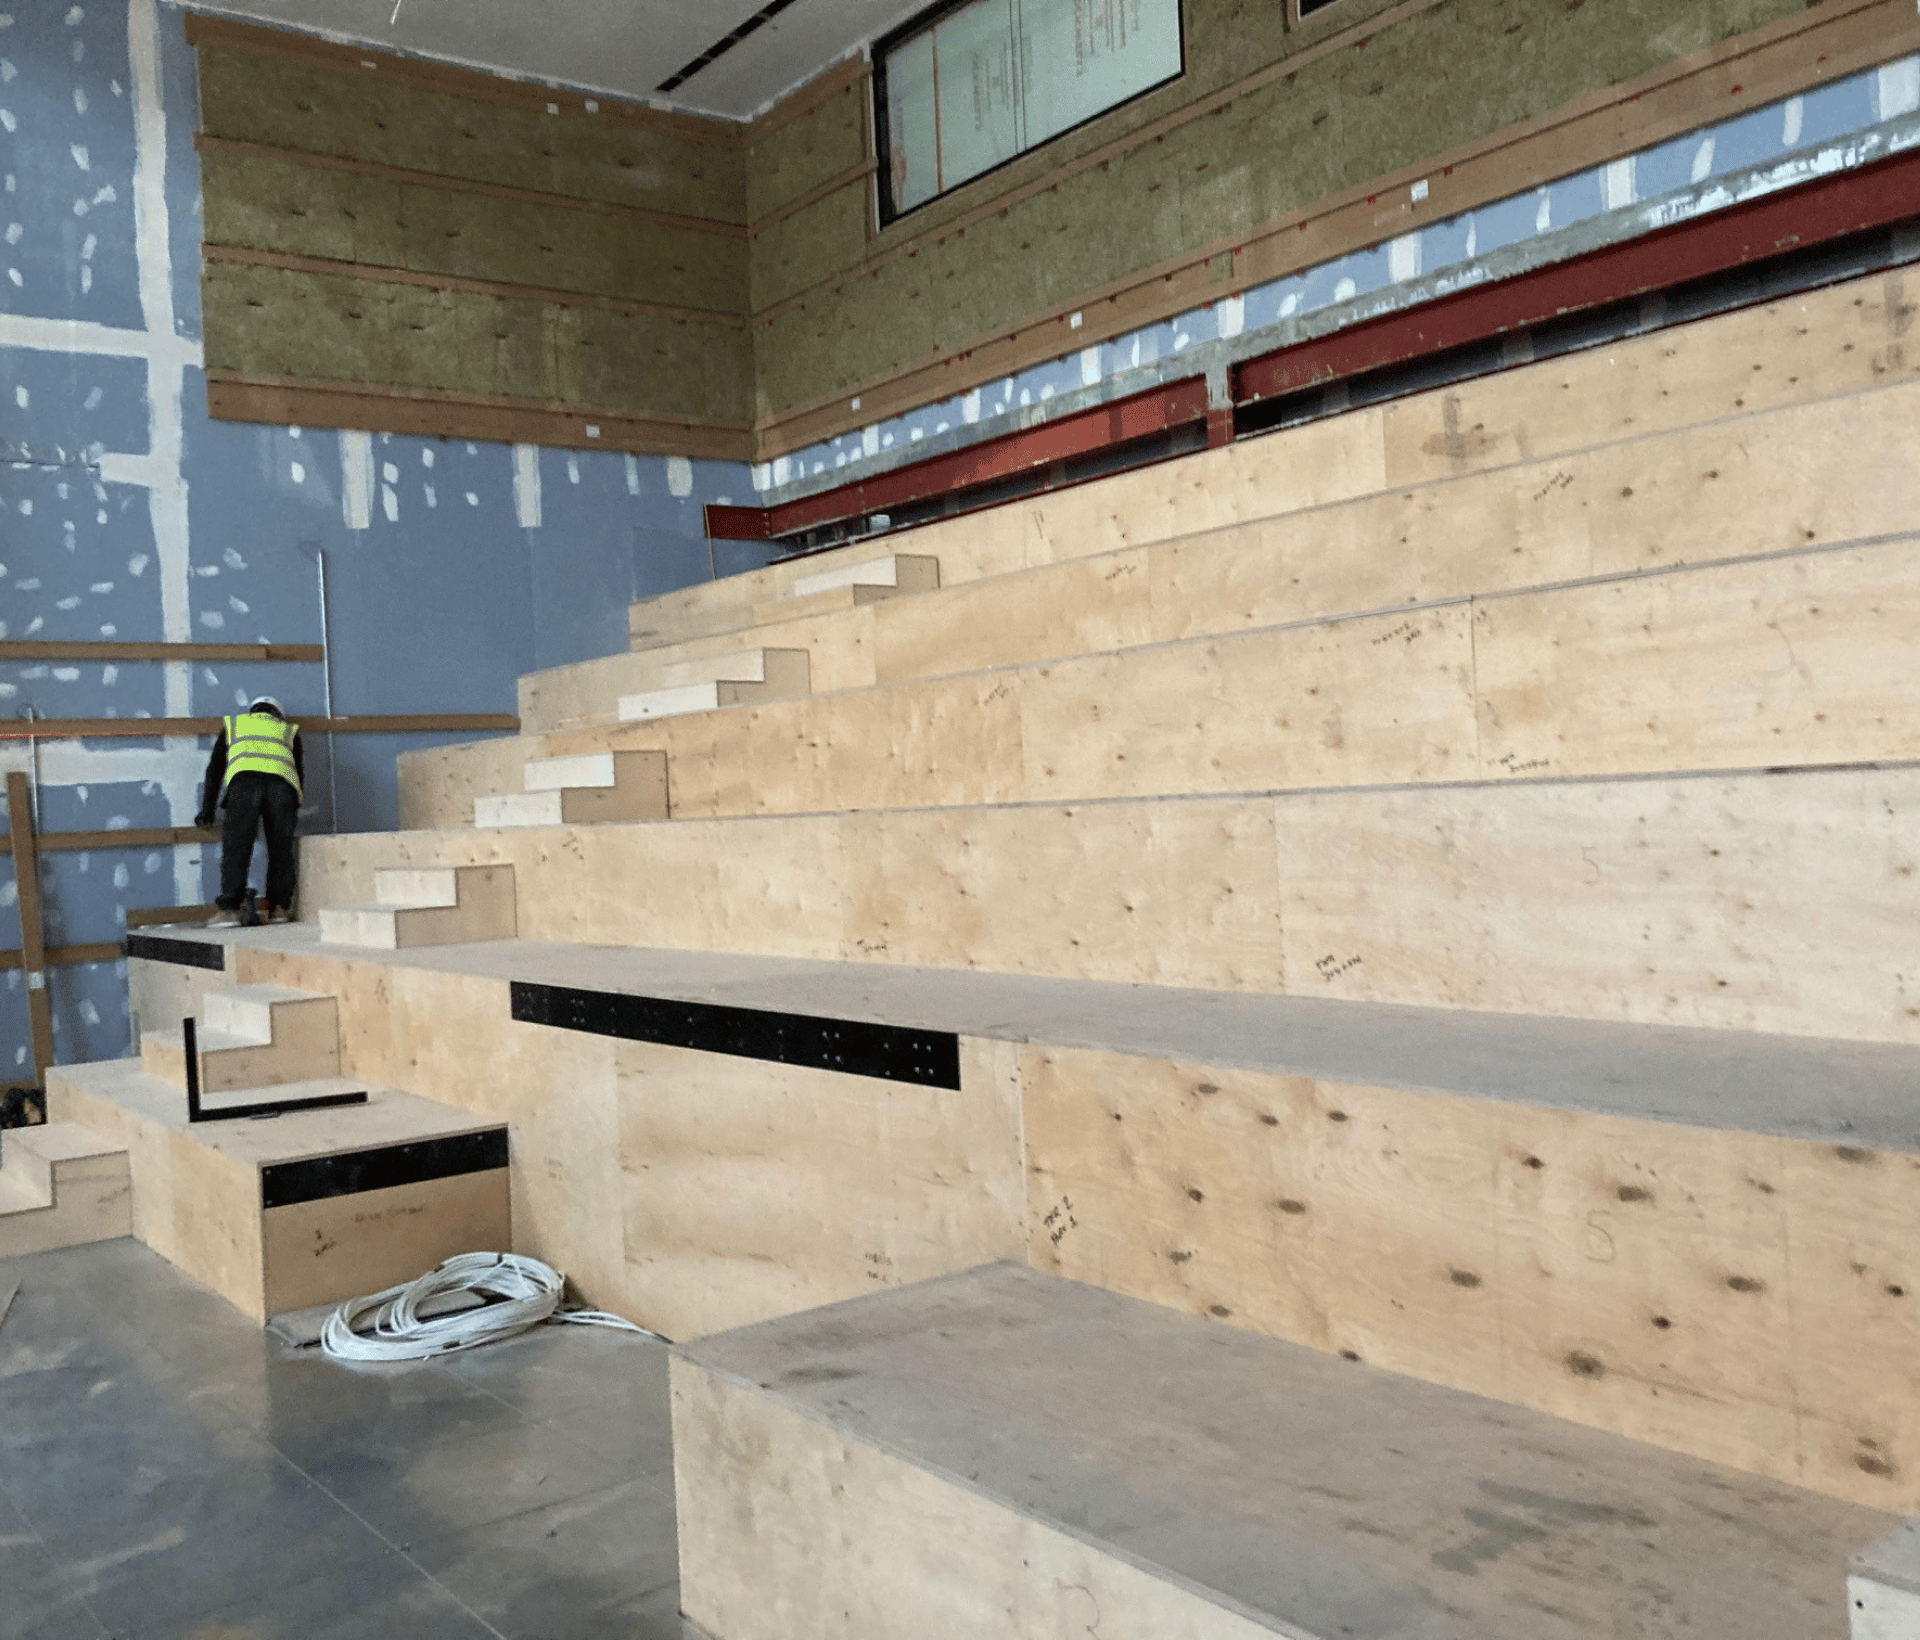 tiered seating under construction